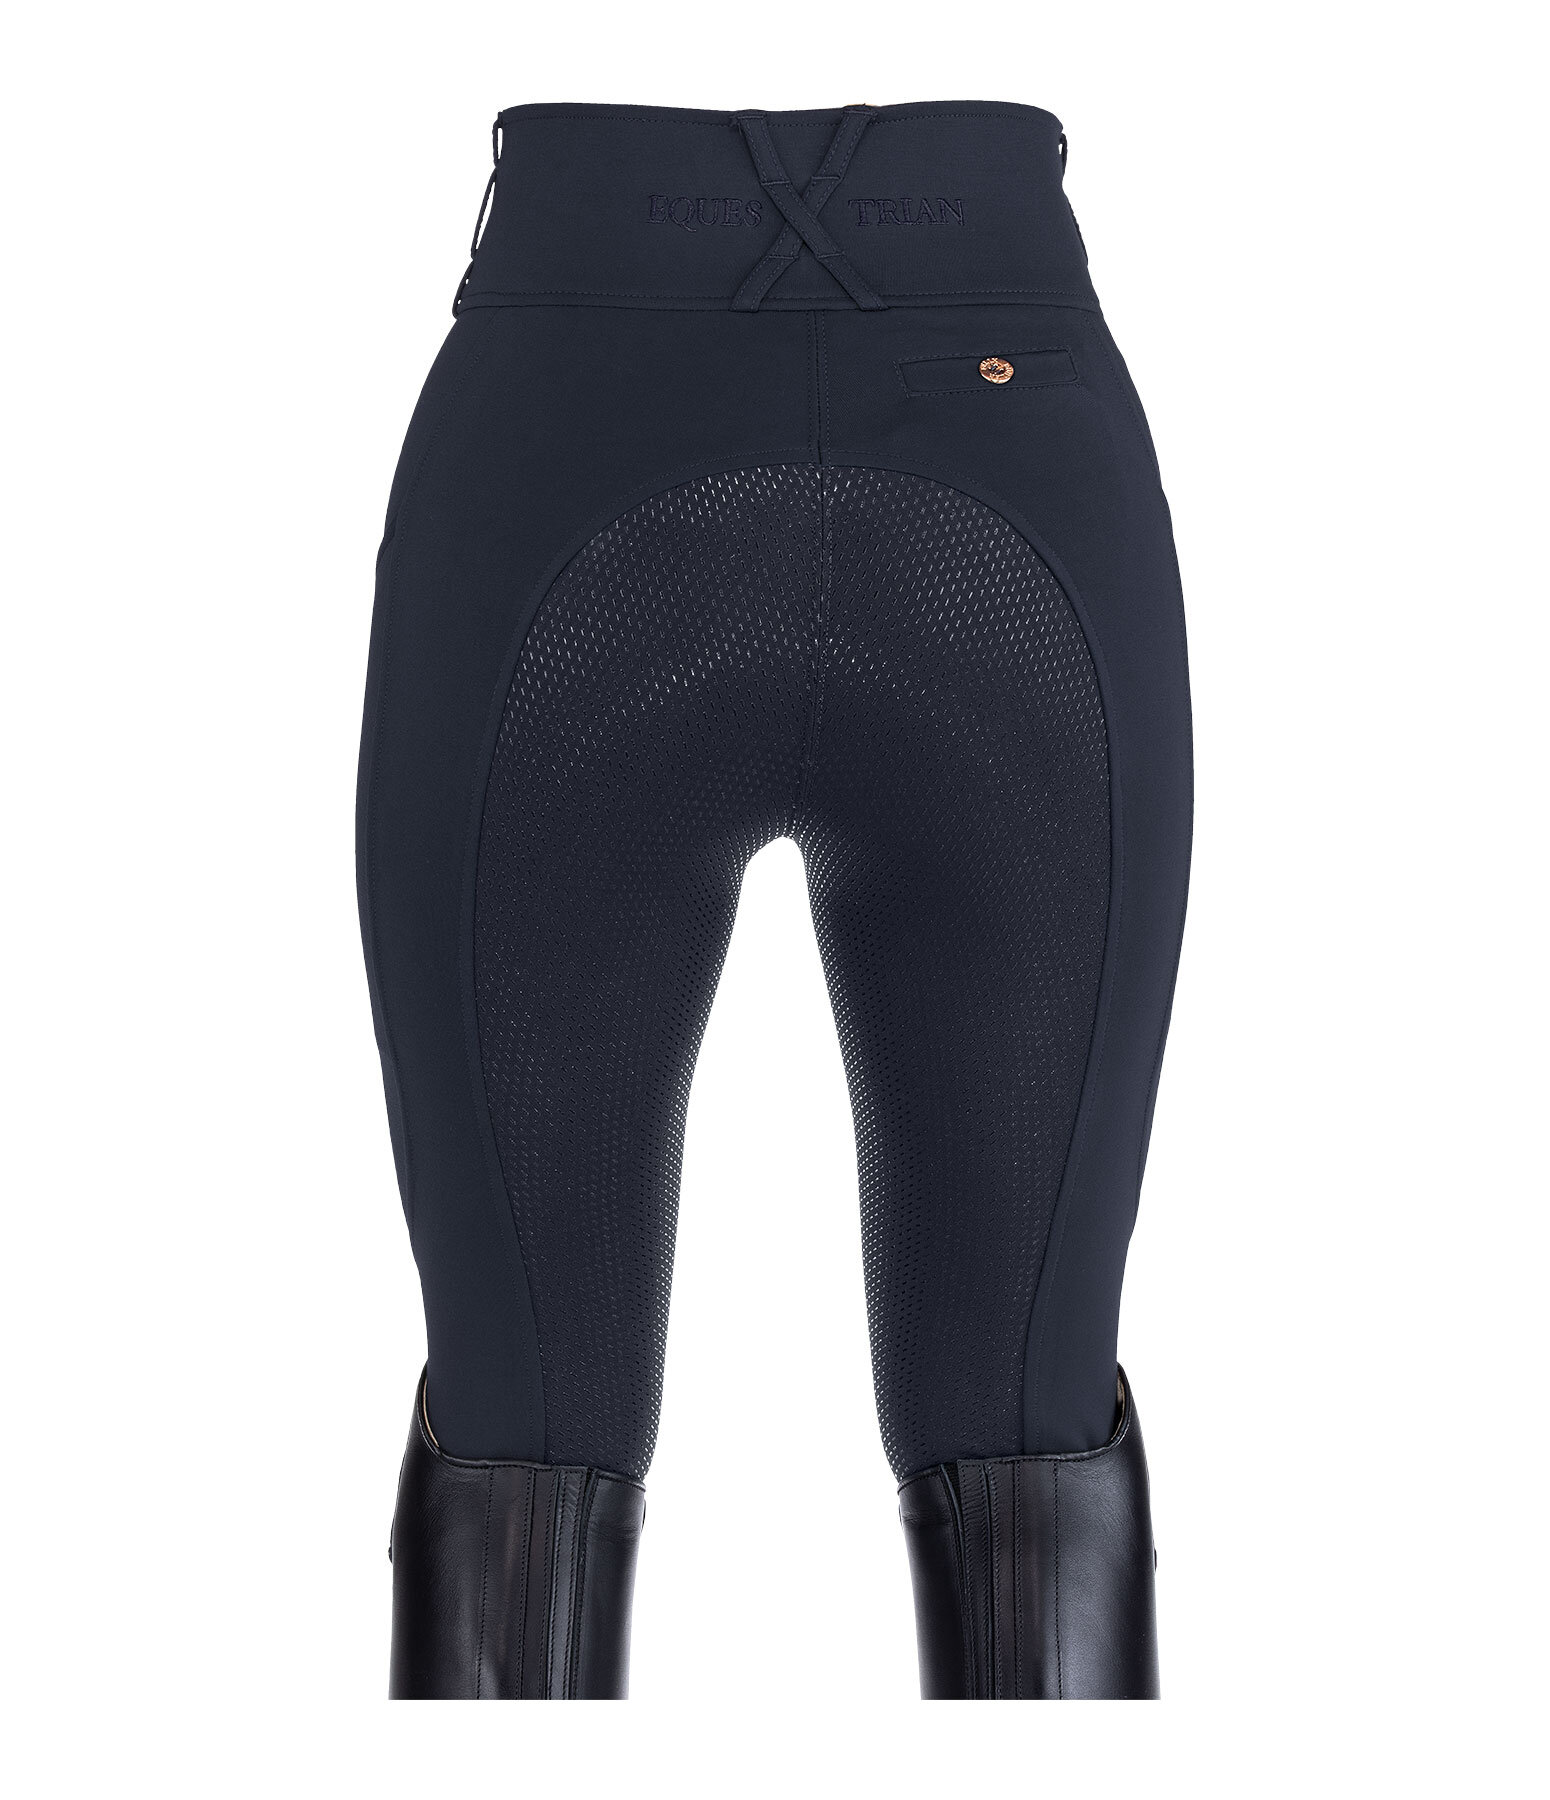 Grip Full Seat Riding Tights Claire